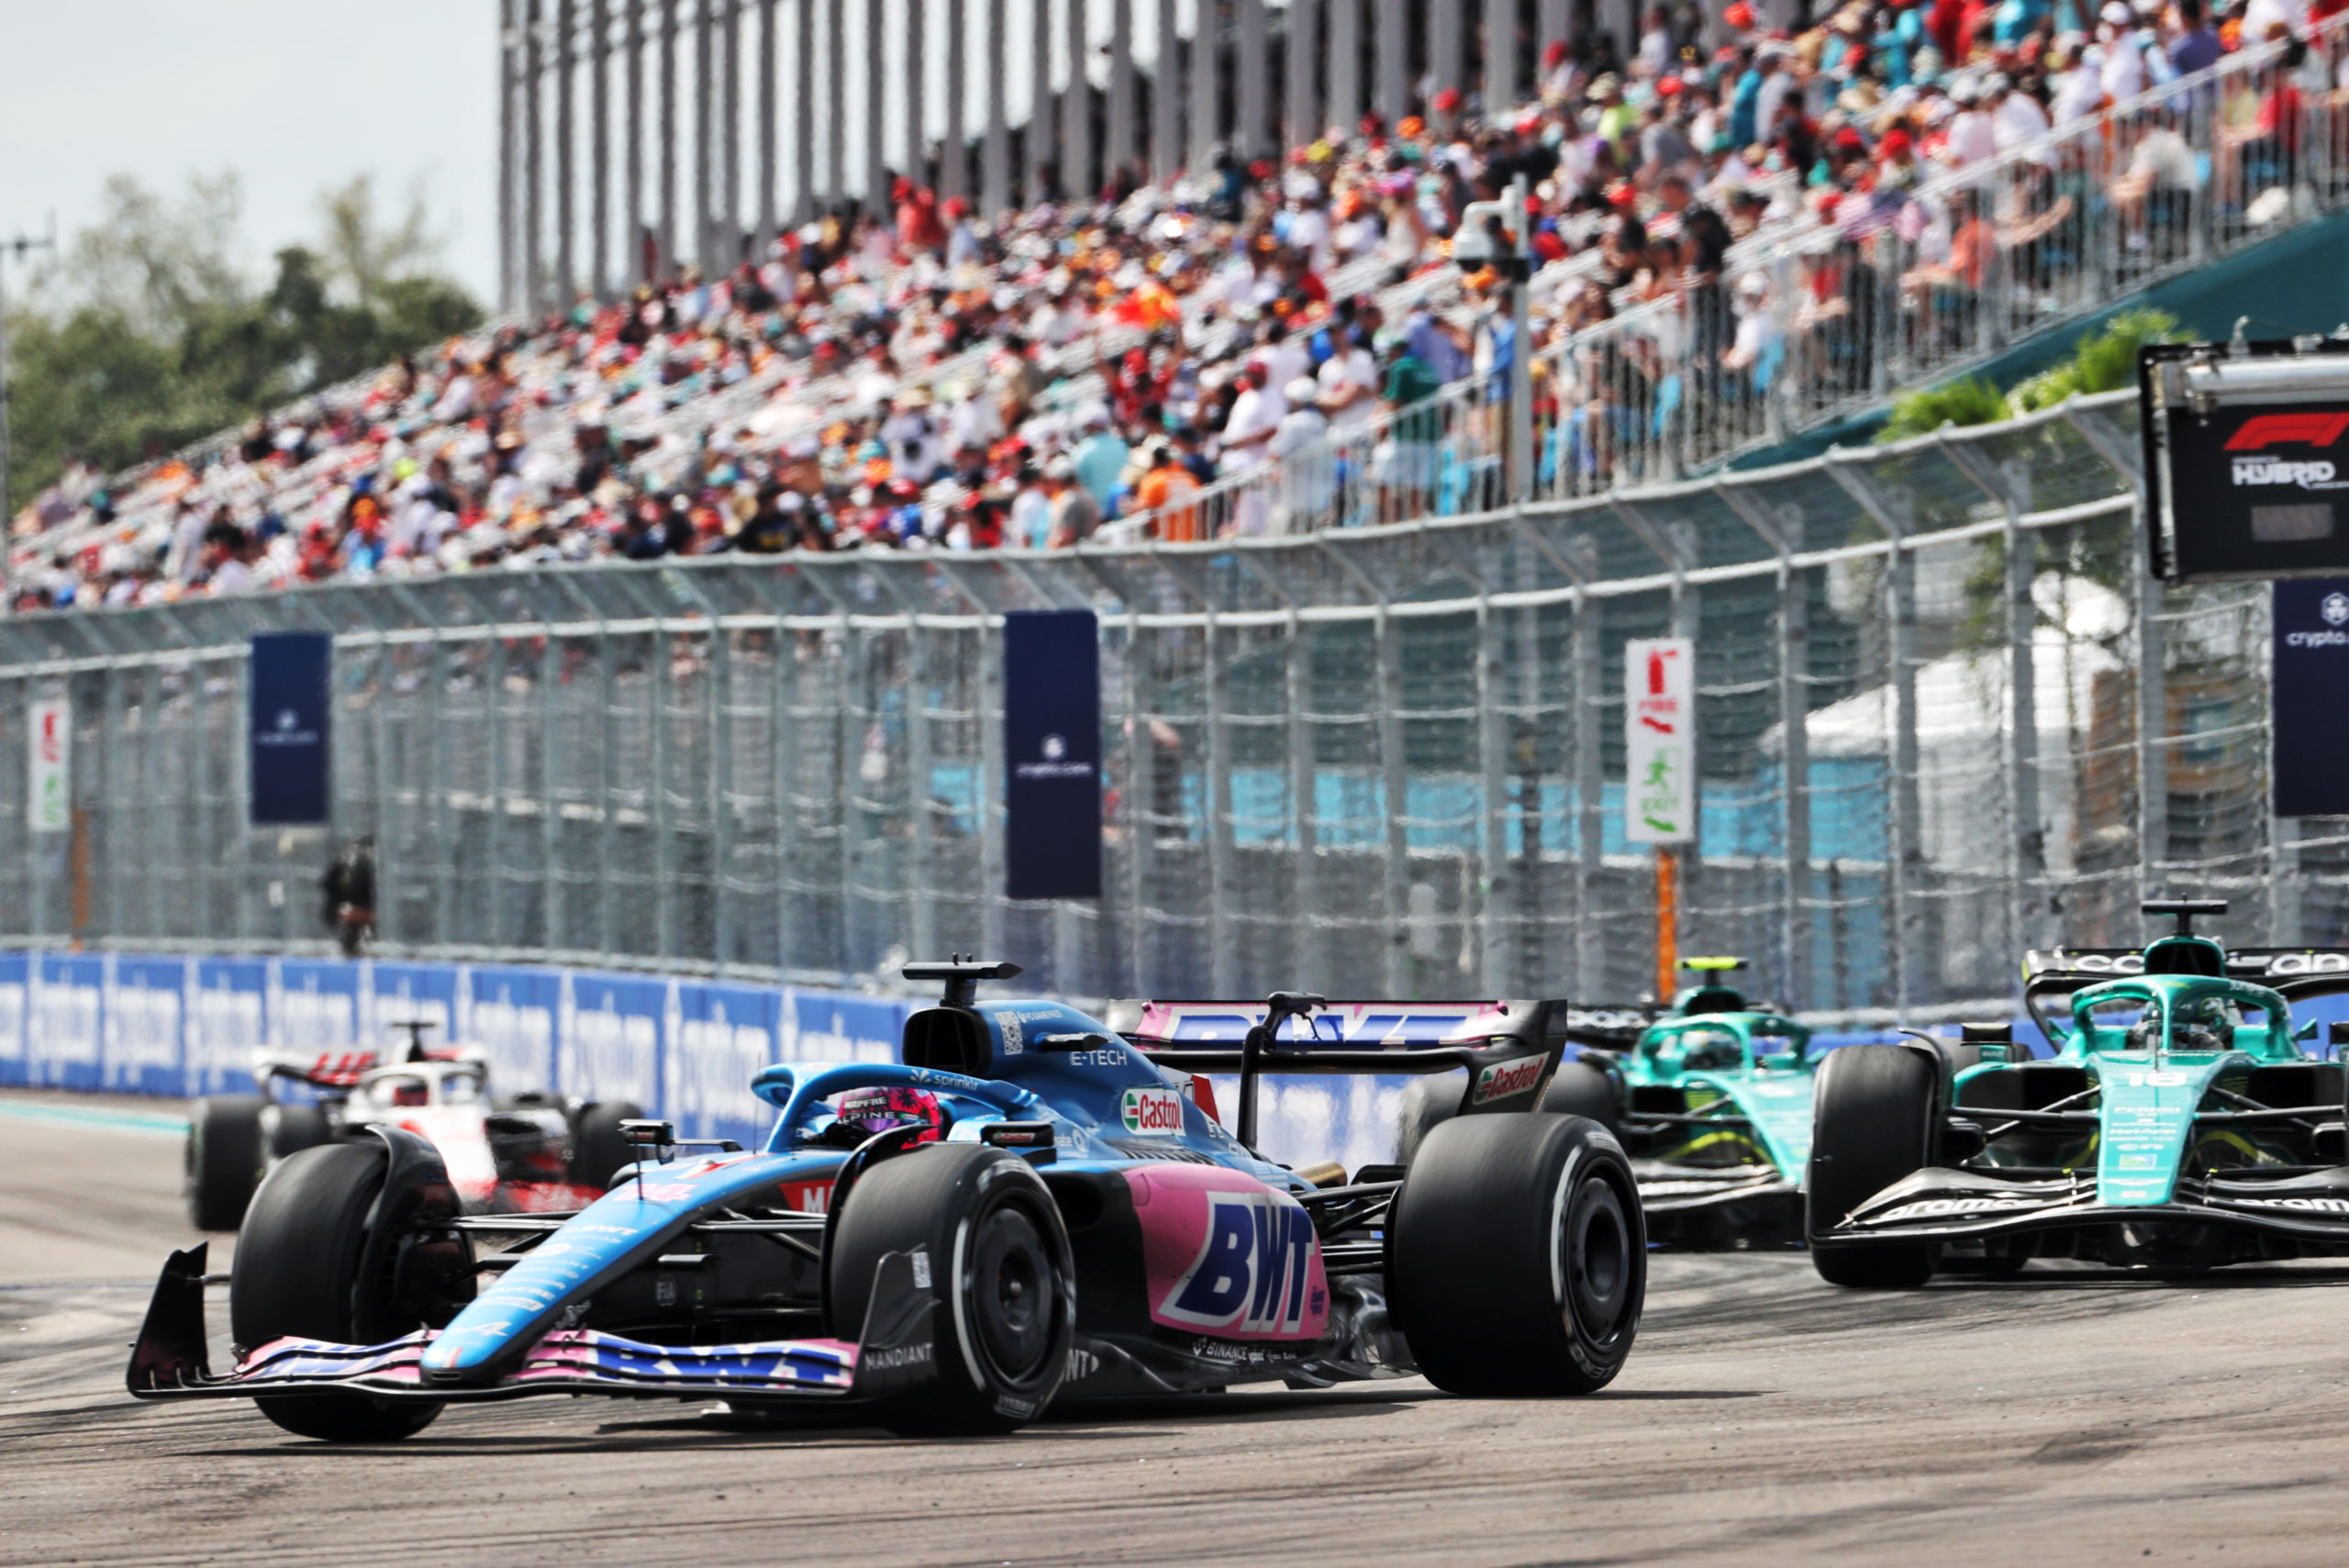 2022 Miami Grand Prix, Sunday - Fernando Alonso hasn't been in great touch of late